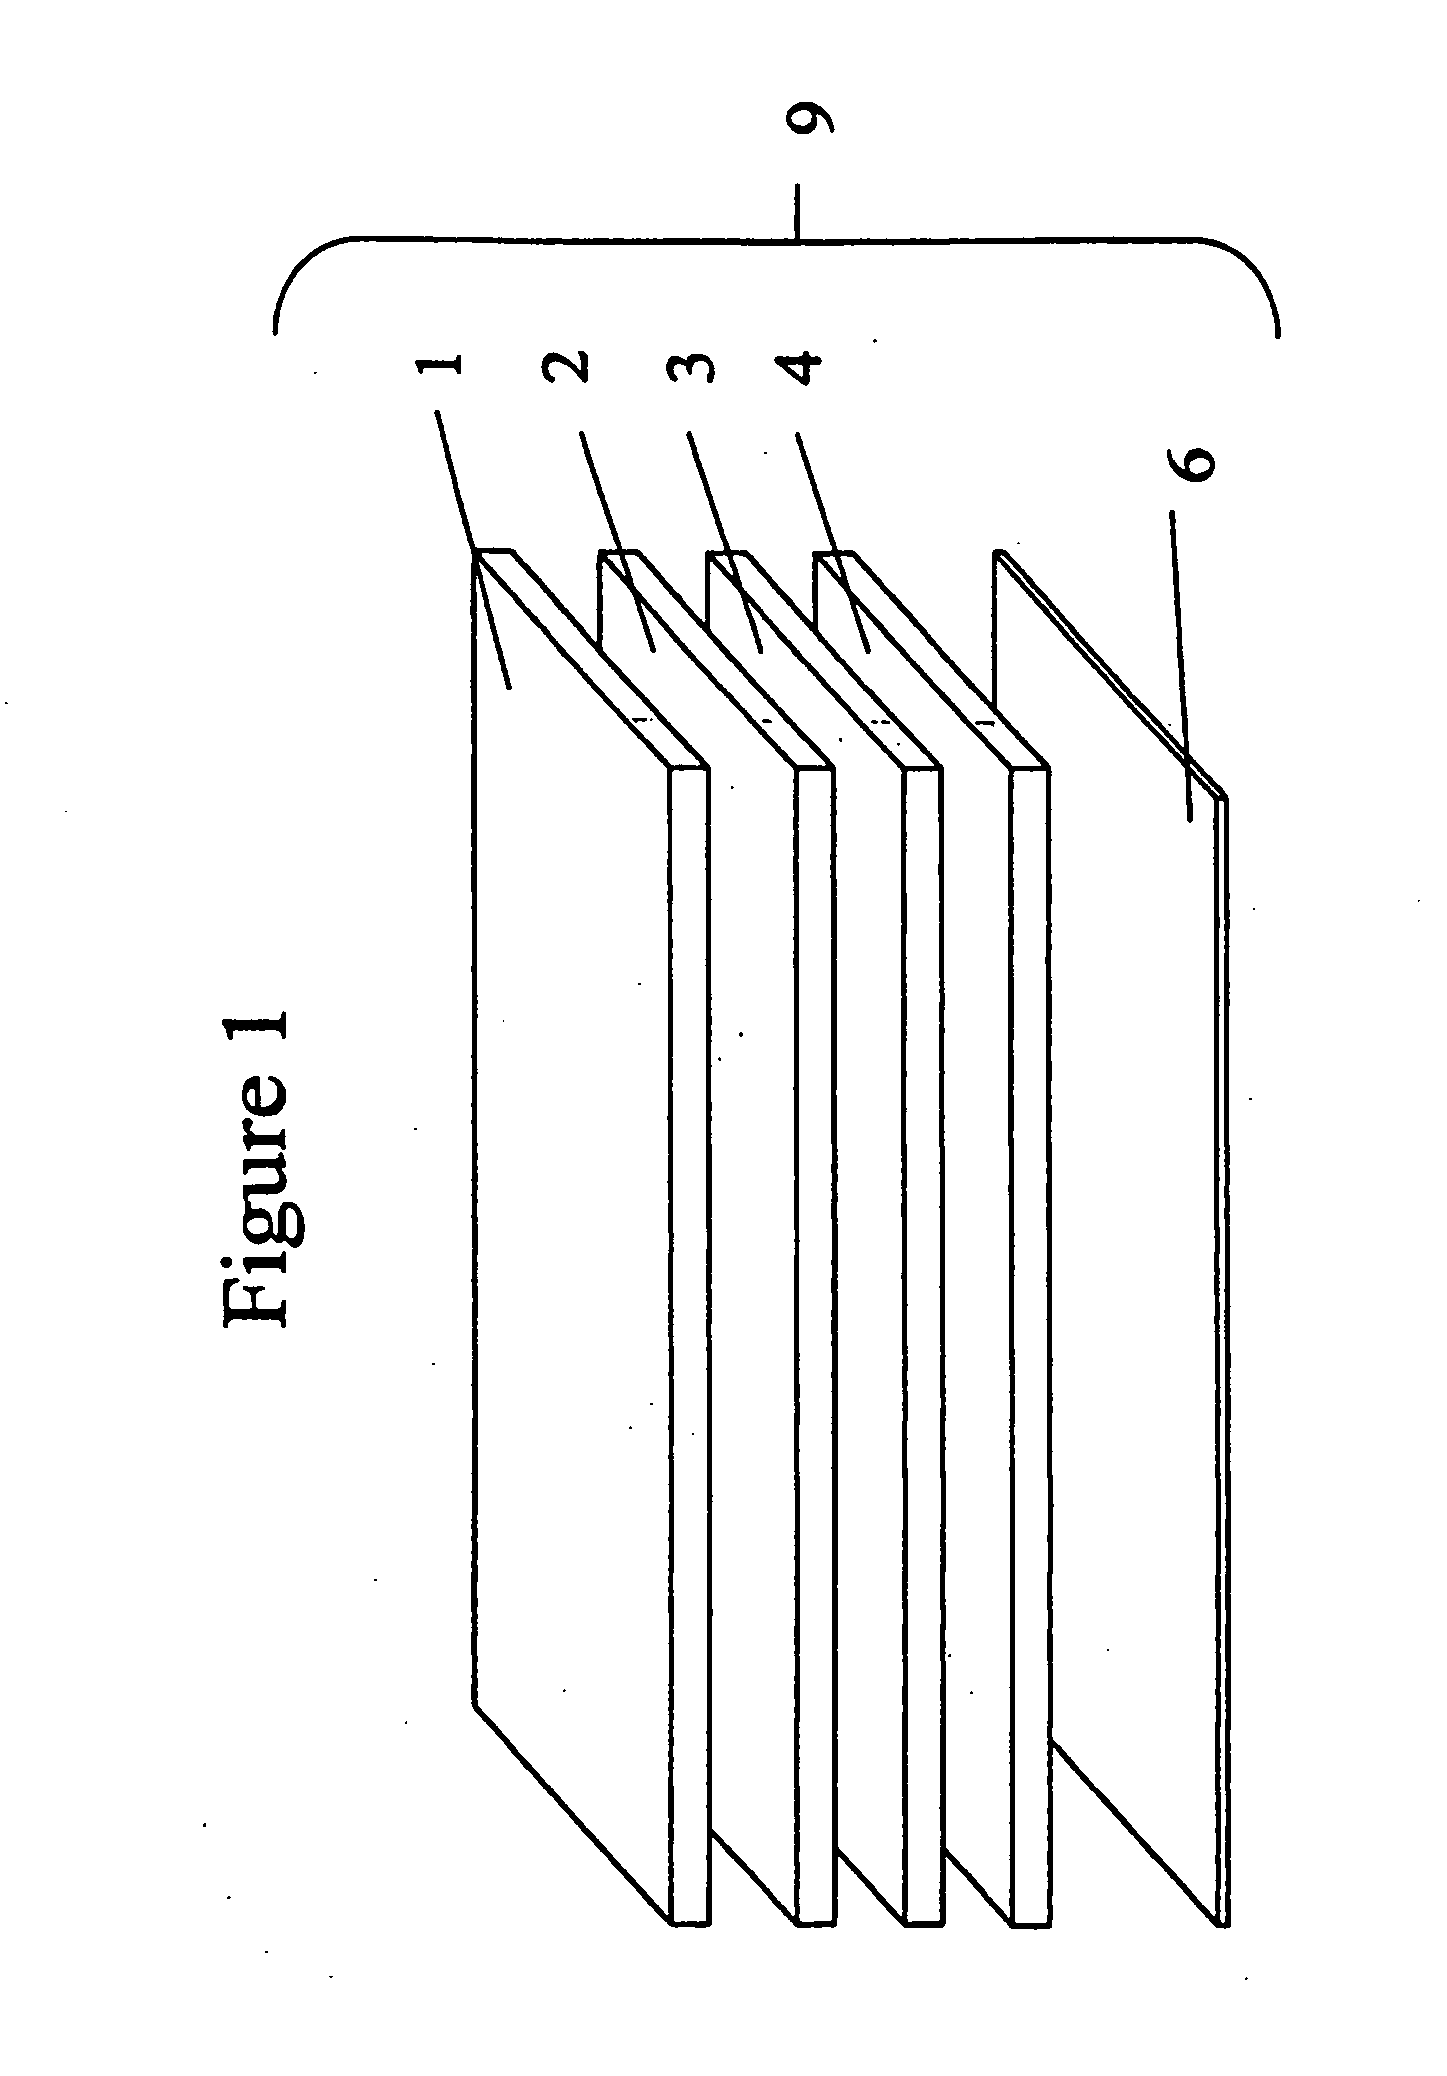 Sustained release air freshening device